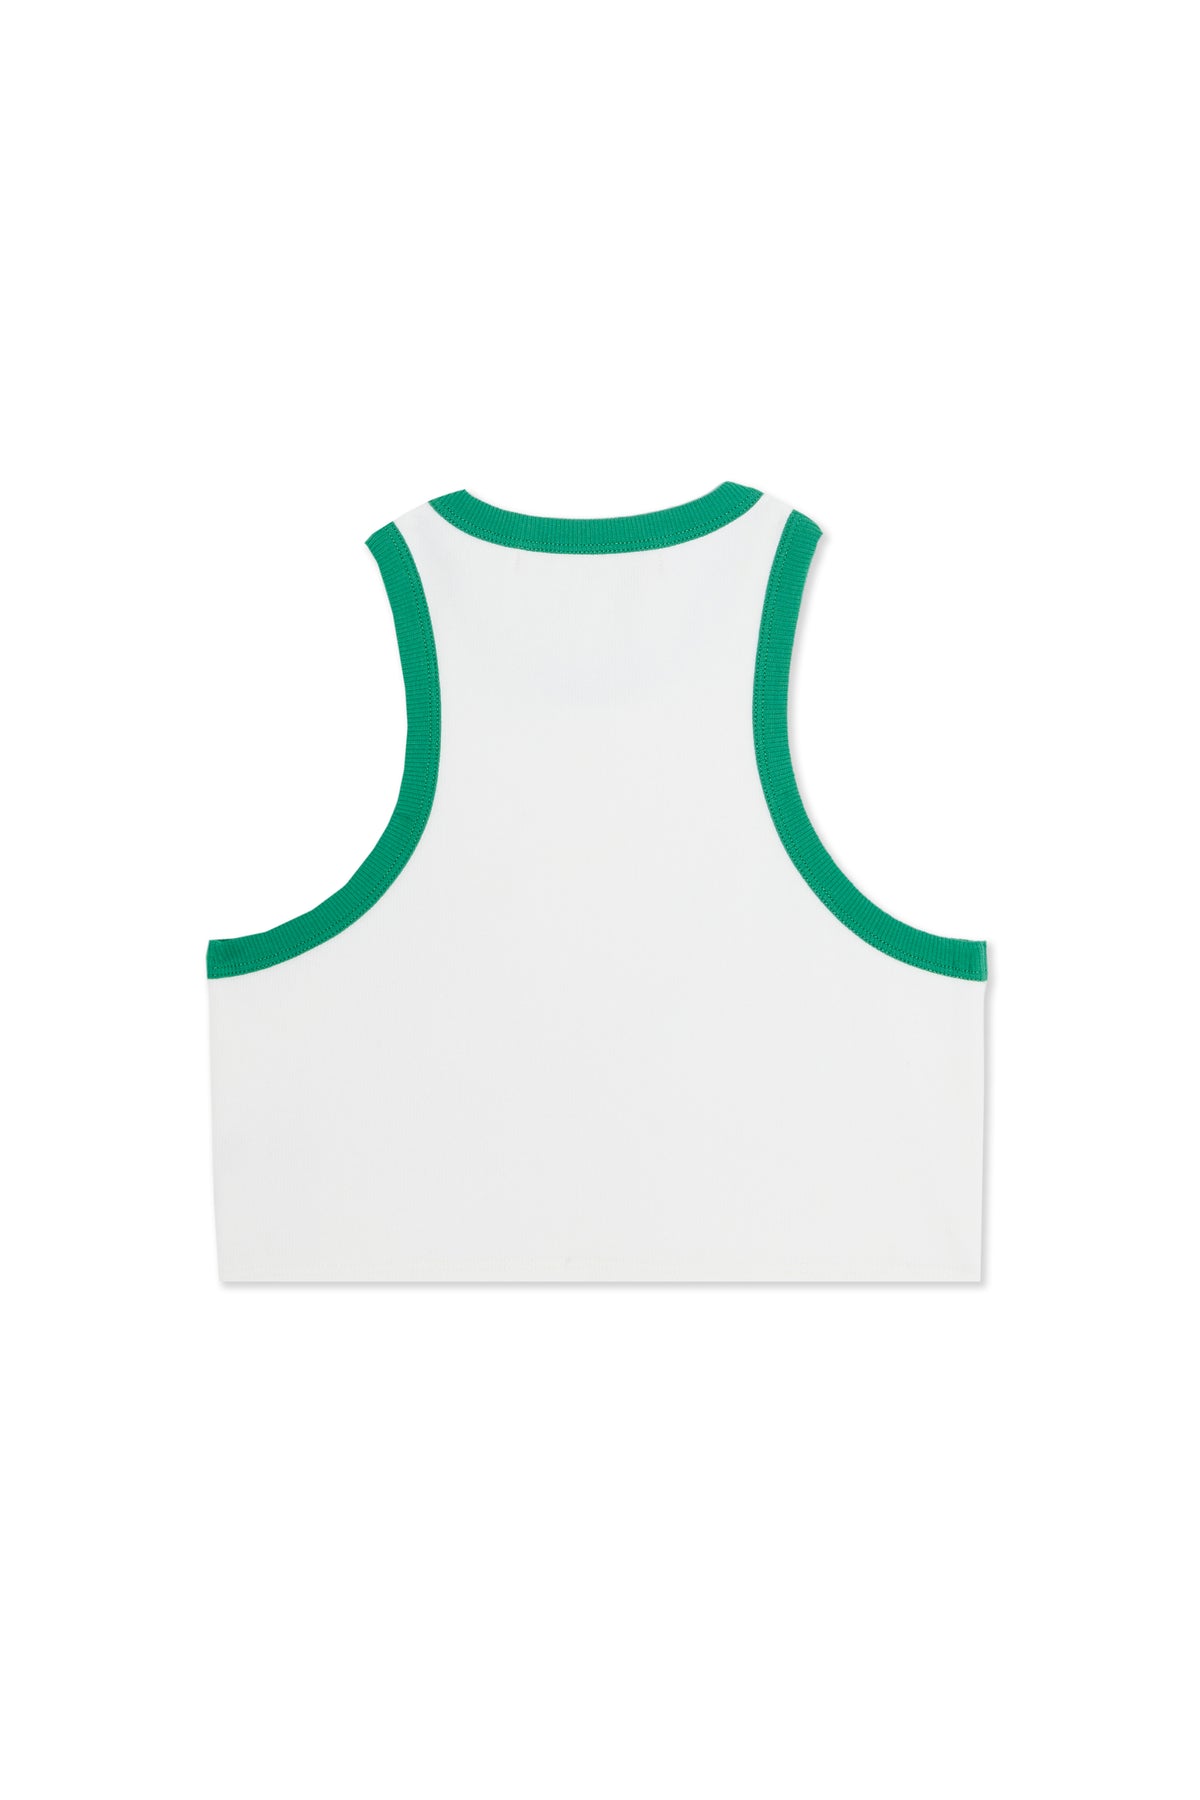 Dibby Tank In Gummy Green Dibby Graphic